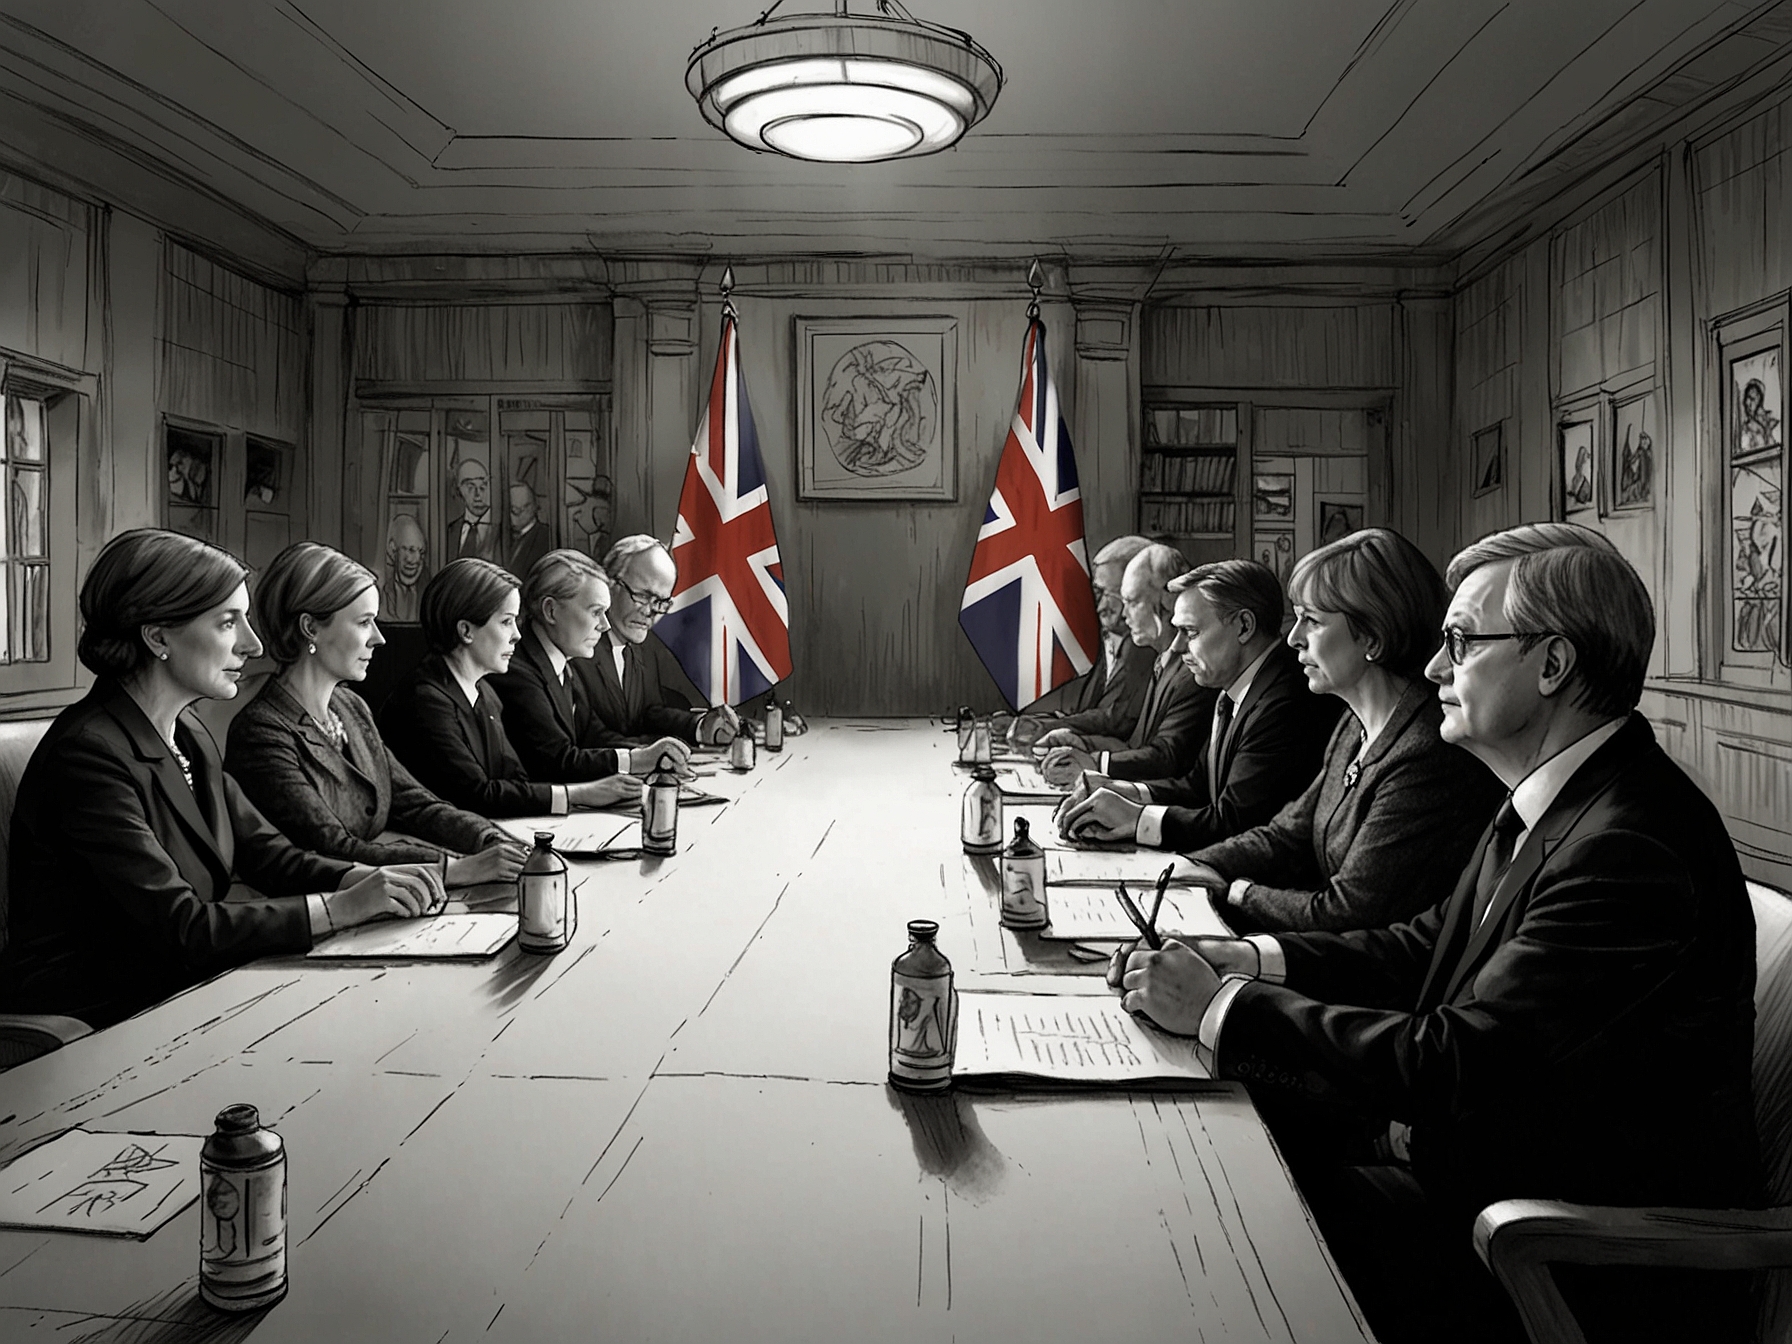 A diplomatic scene with representatives from Ireland and the UK discussing post-Brexit border policies. The image highlights potential cooperation efforts and challenges posed by UK political shifts.